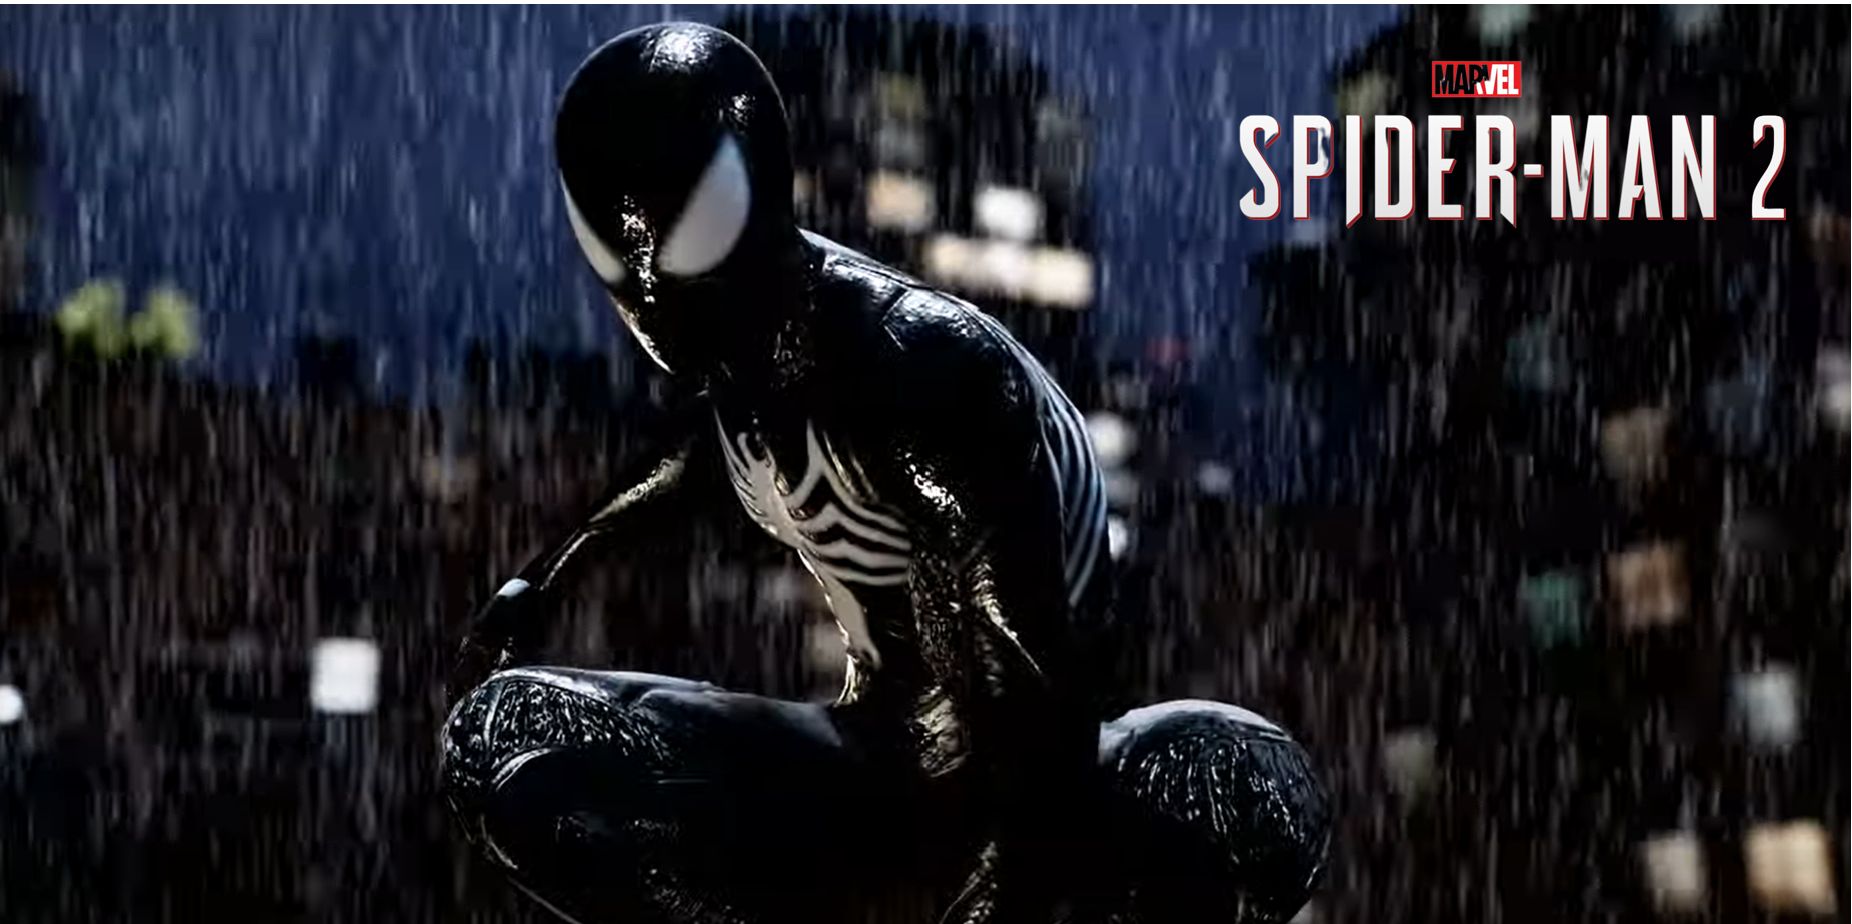 Peter In The Symbiote Suit